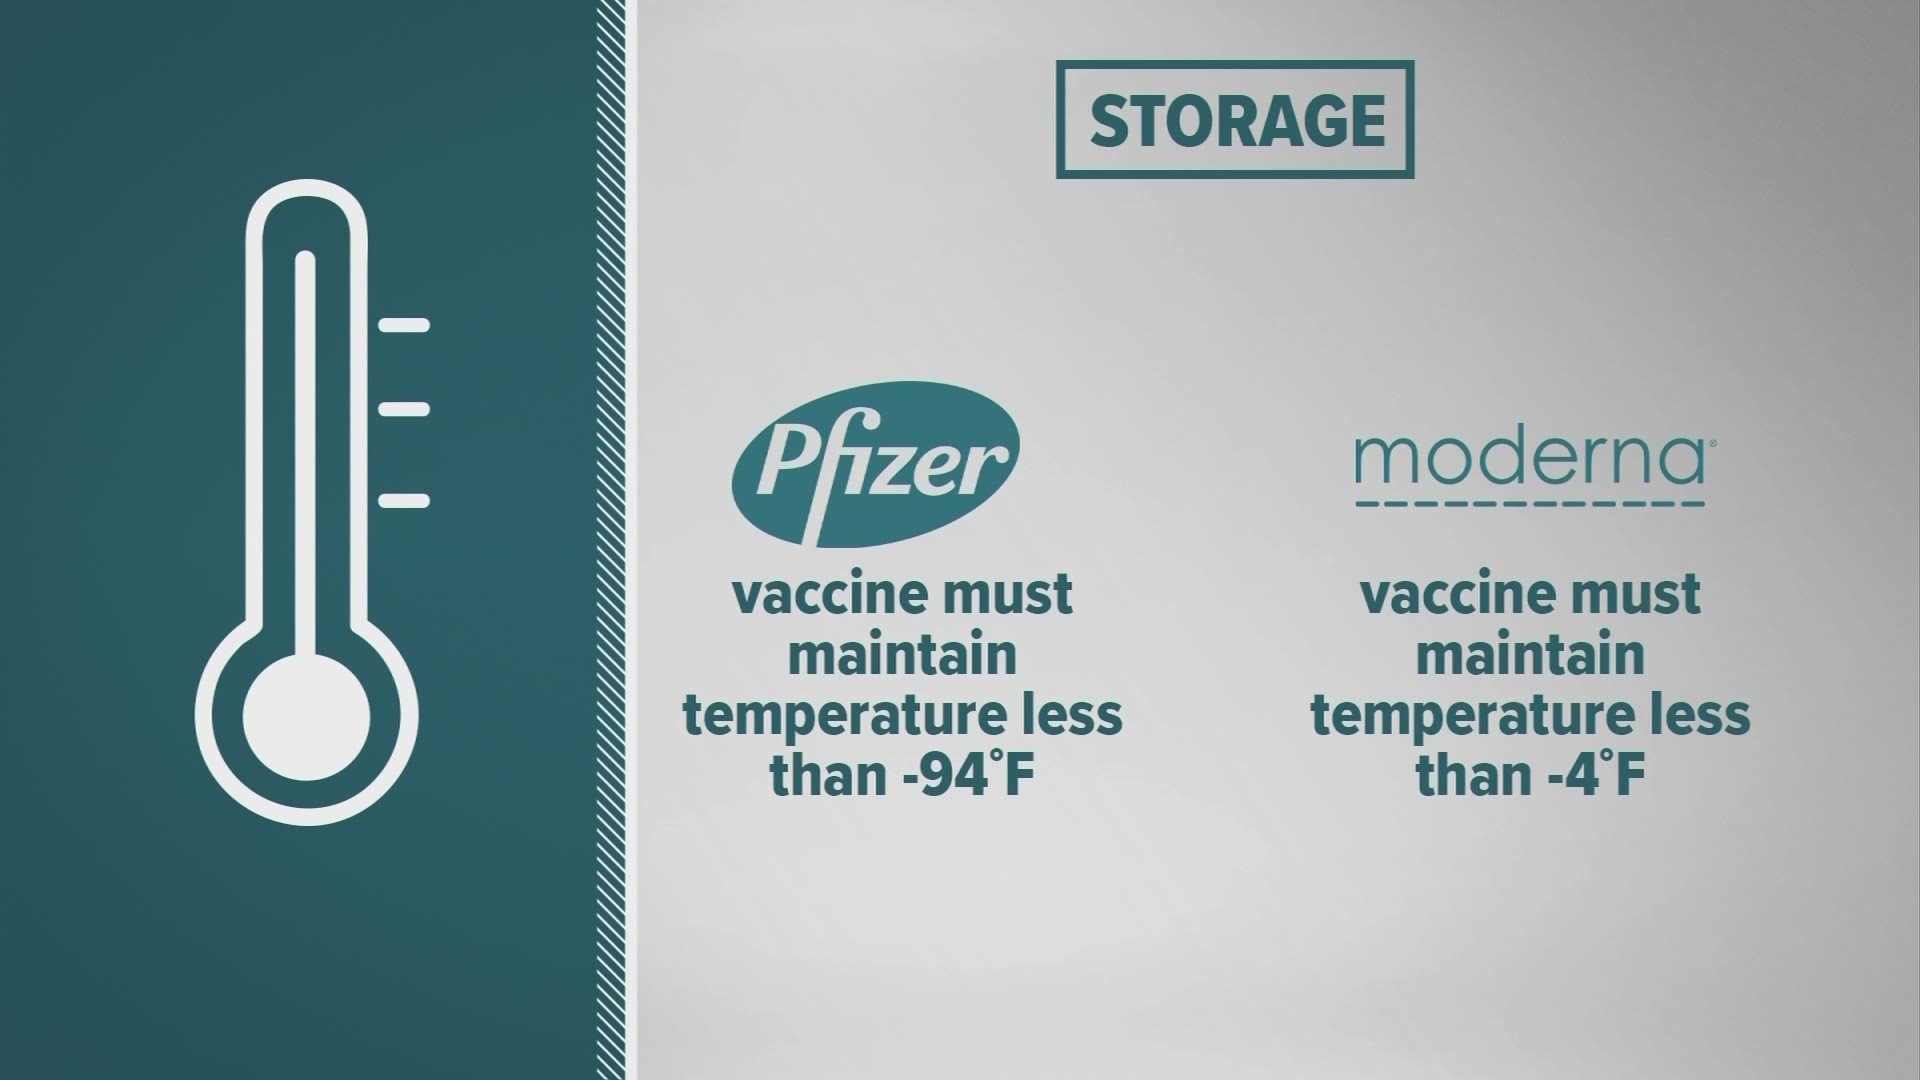 10TV's Angela Reighard breaks down the differences between the Moderna and Pfizer vaccines.